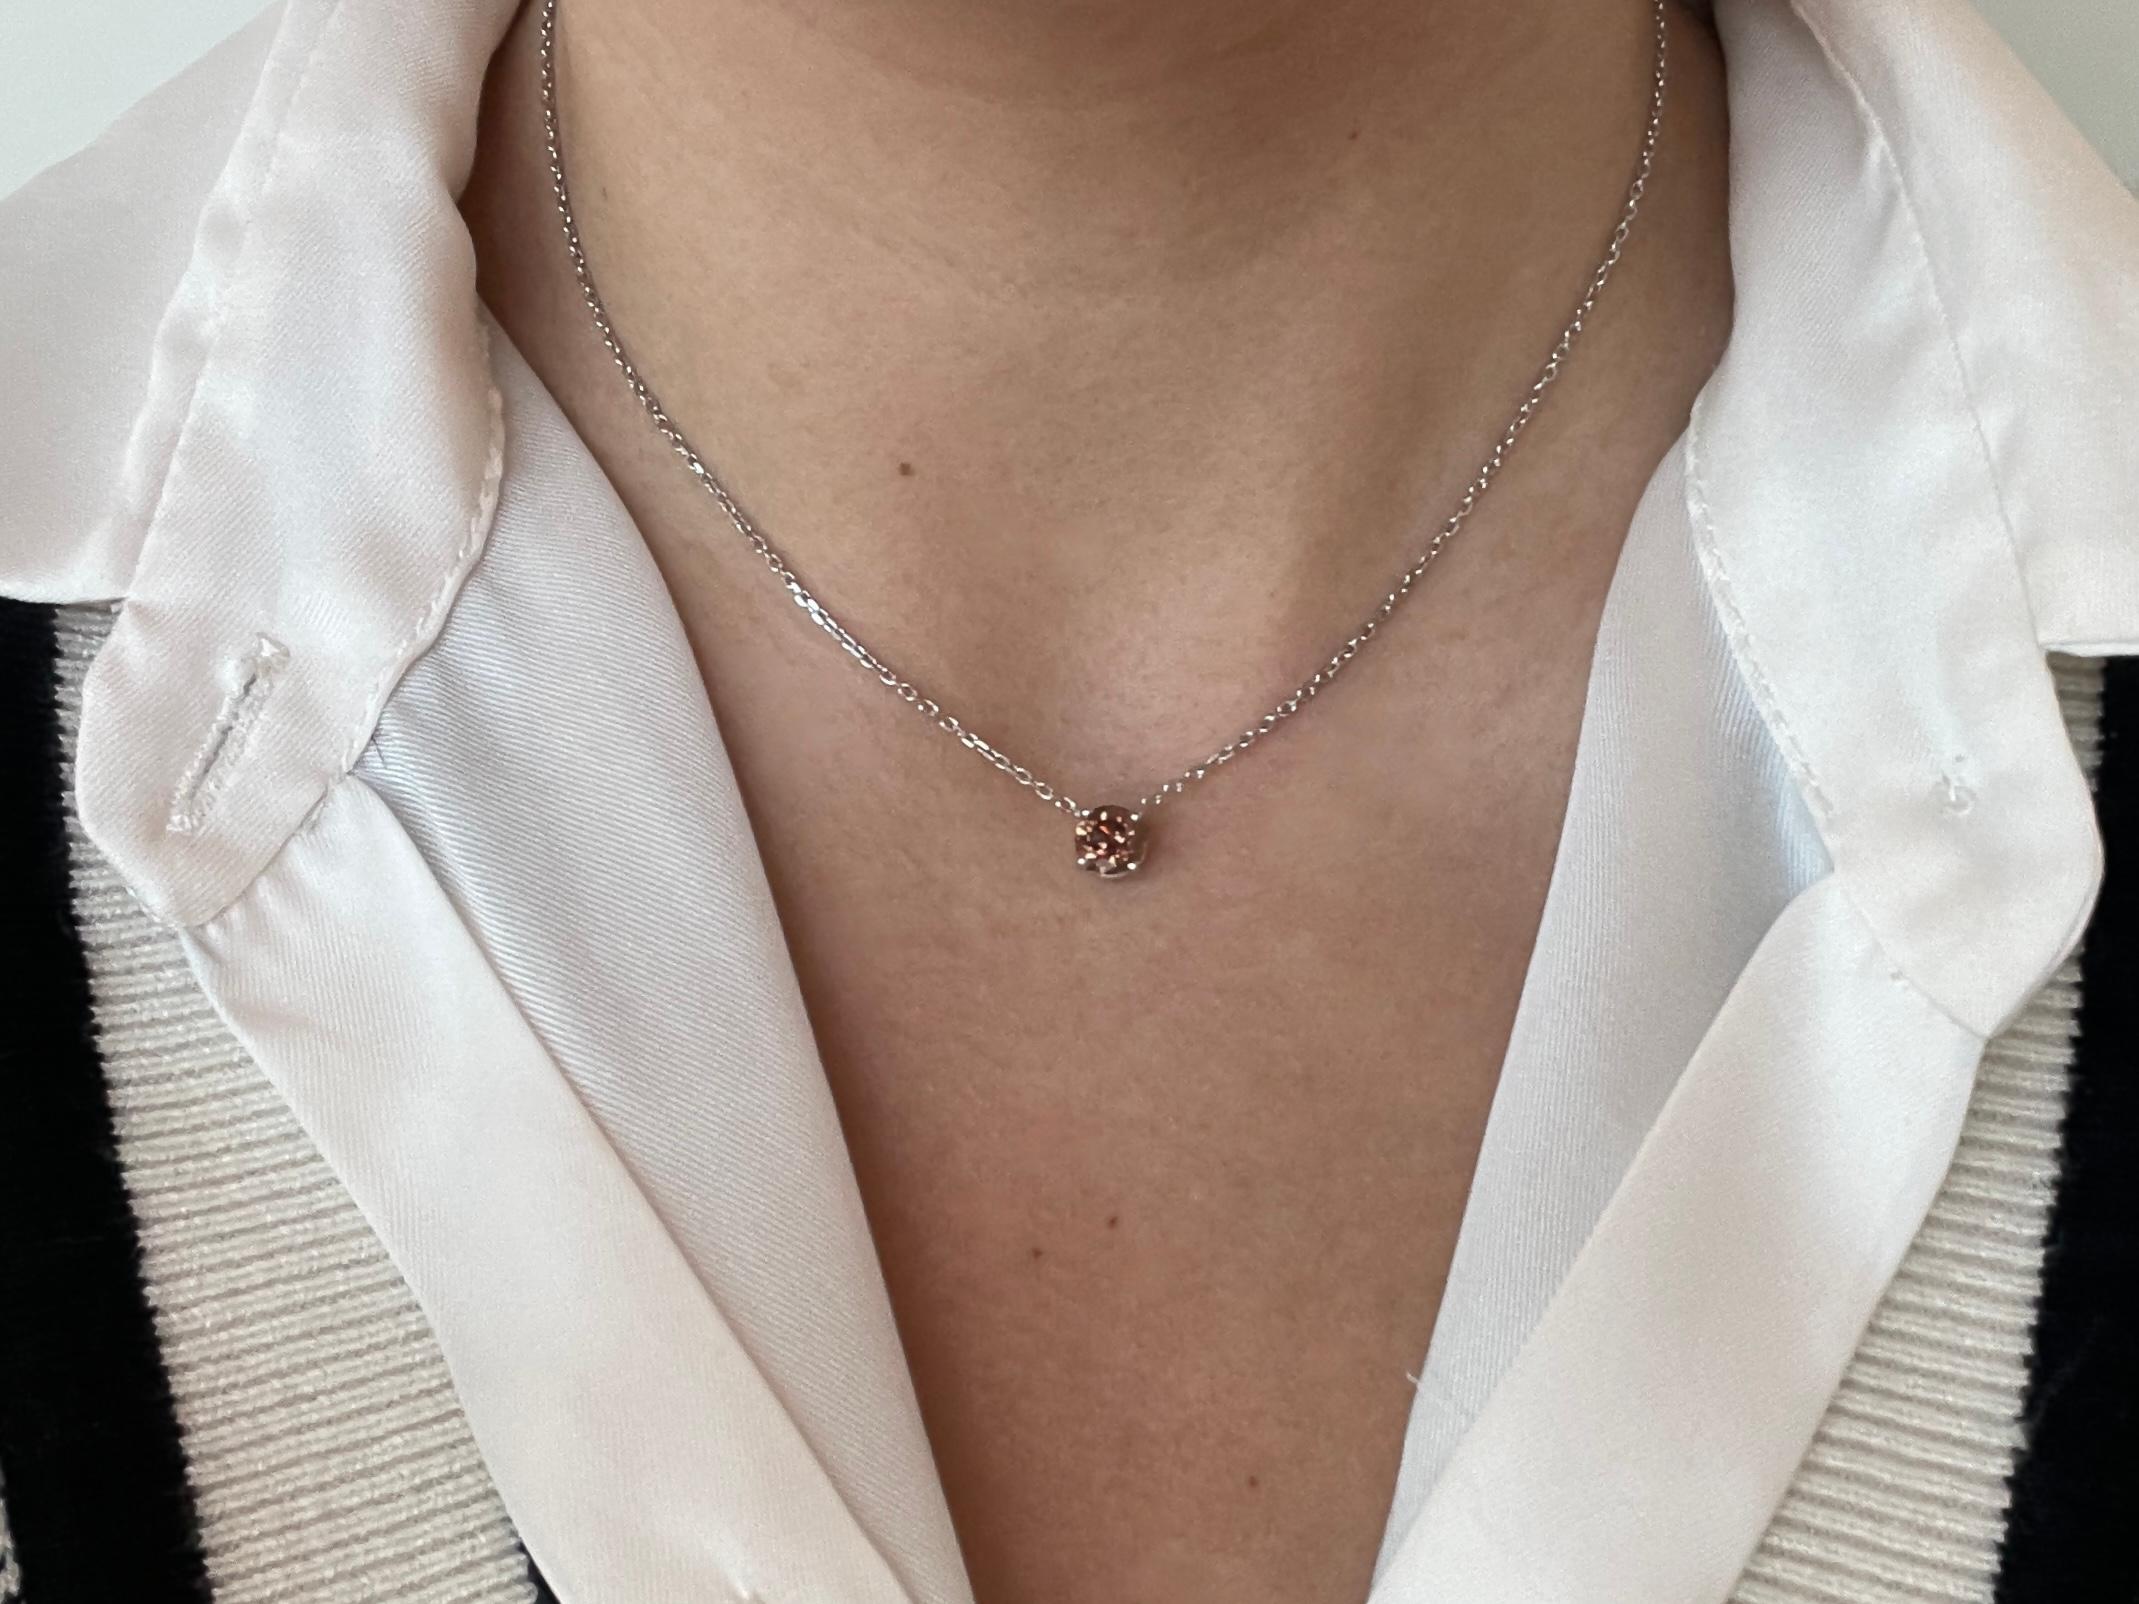 A beautiful white gold necklace featuring a stunning 1.10-carat diamond from GASSAN 121. This exquisite necklace showcases a single Gassan 121 cut diamond, renowned for its brilliance and unique characteristics, with a weight of 1.00 carat. The